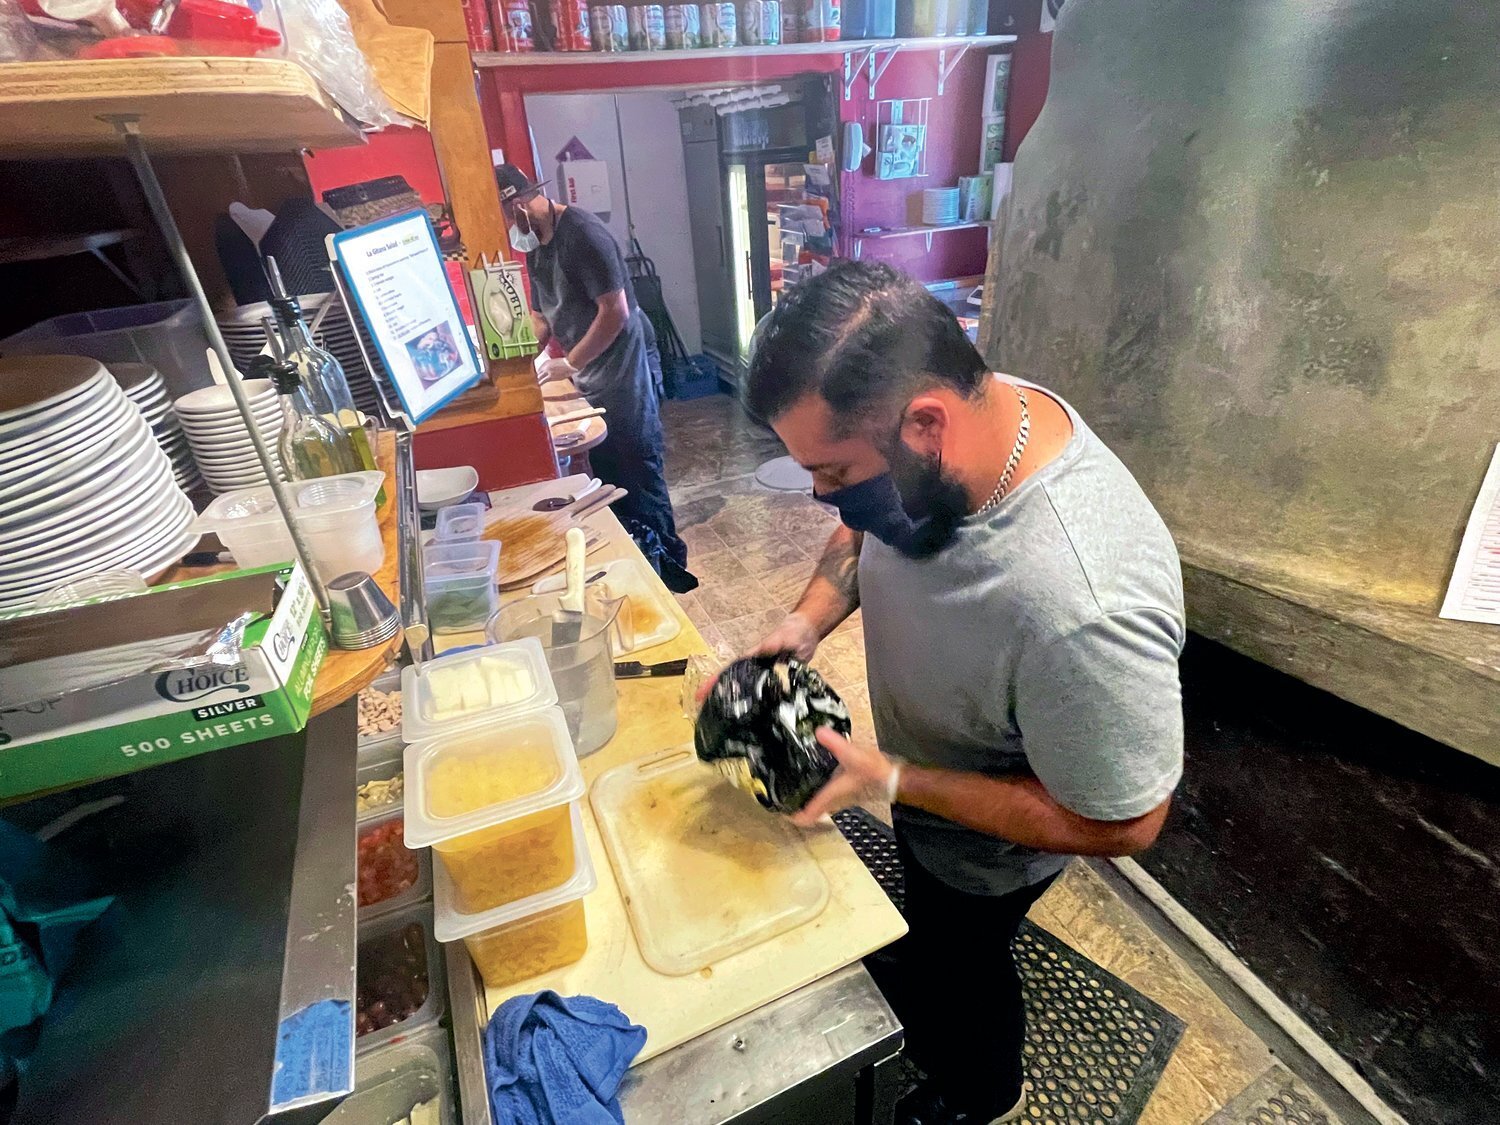 Francisco Arias, a cook at Pizzeria La Gitana of Yelm, prepares food in this file photo.